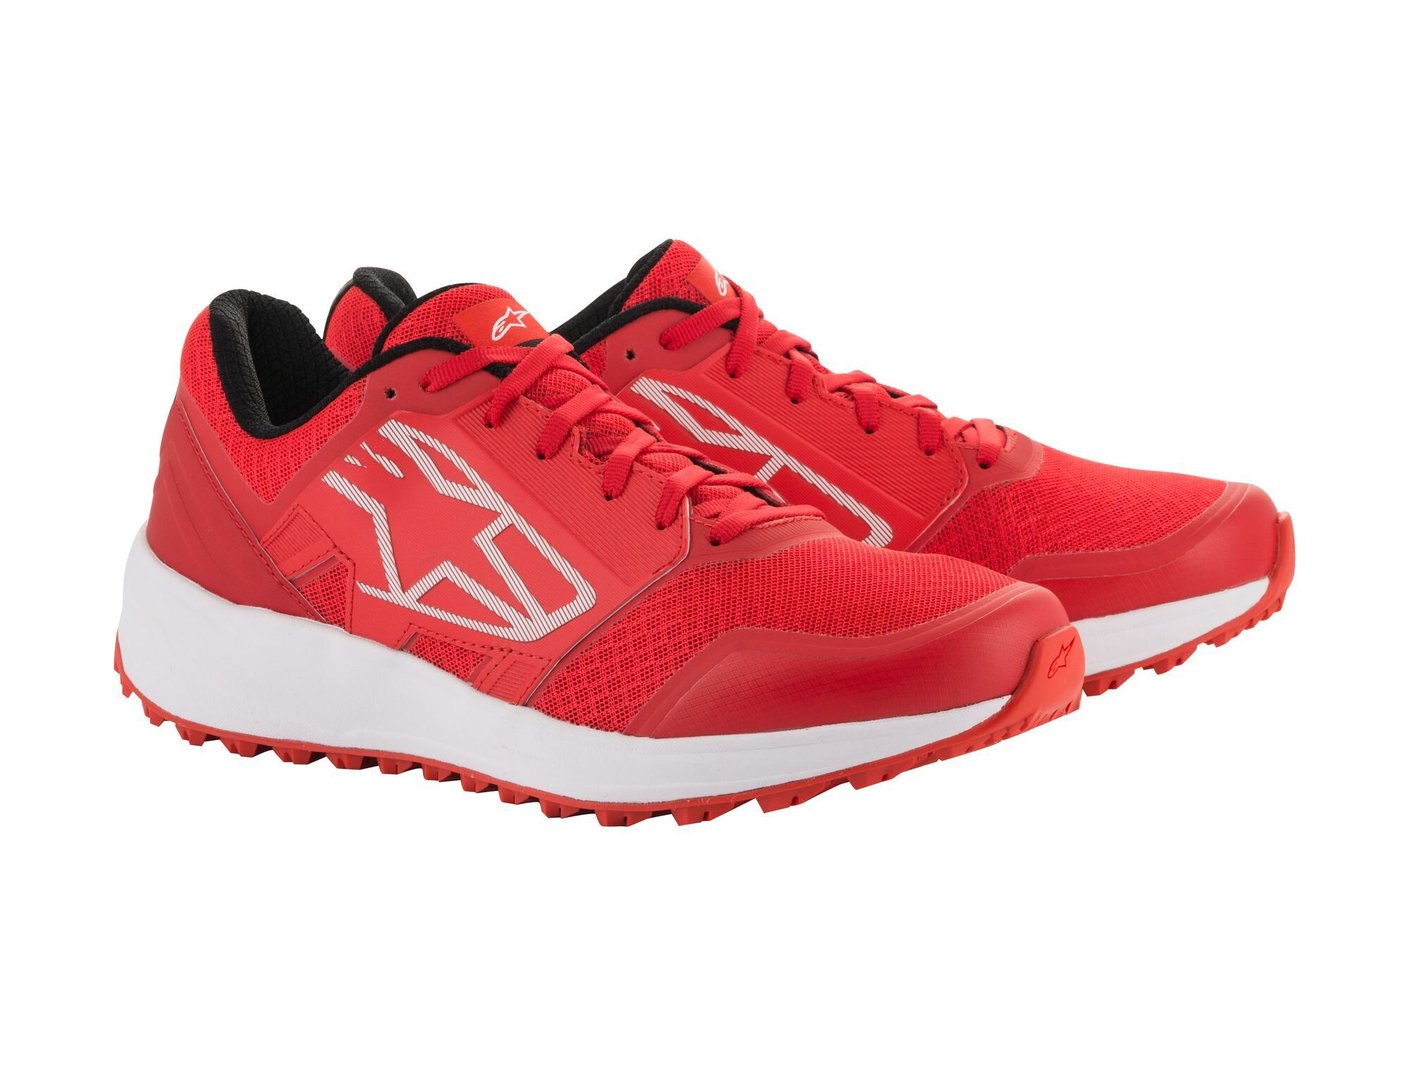 ALPINESTARS 2654820_32_12 META TRAIL RUNNING shoes, red/white, size 45,5 (12) (Фото-1)